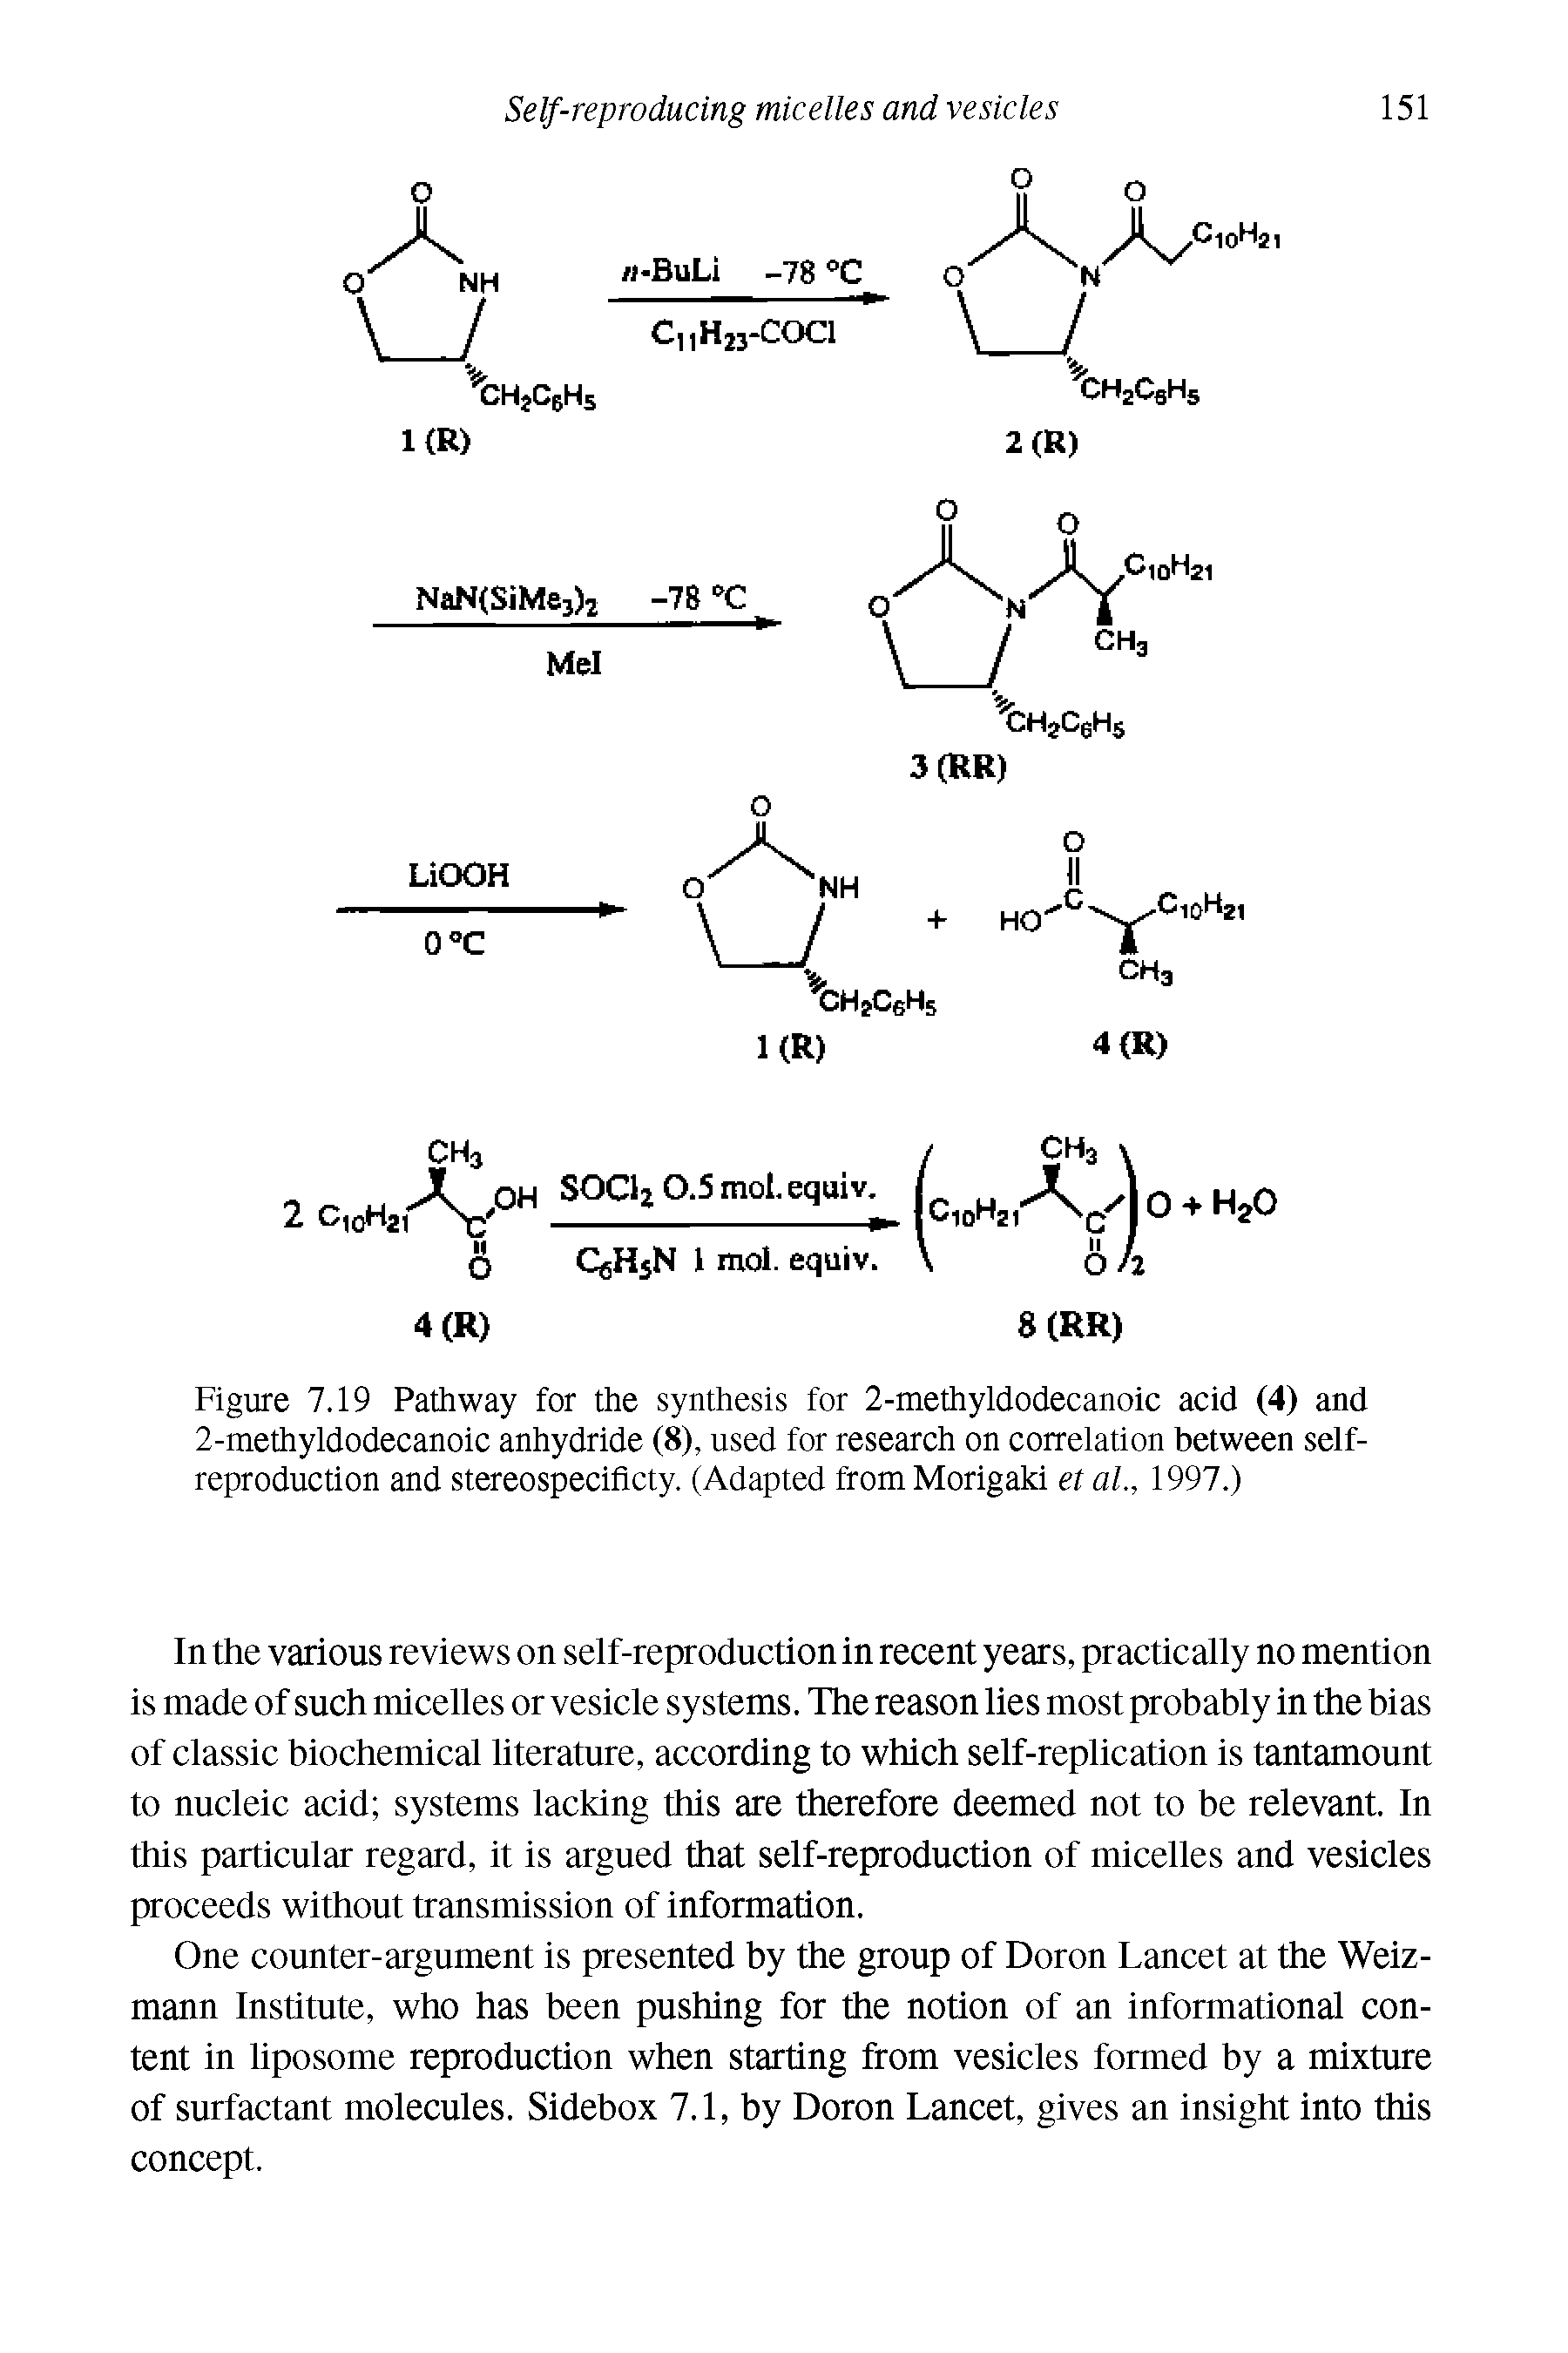 Figure 7.19 Pathway for the synthesis for 2-methyldodecanoic acid (4) and 2-methyldodecanoic anhydride (8), used for research on correlation between selfreproduction and stereospecificty. (Adapted from Morigaki et al., 1997.)...